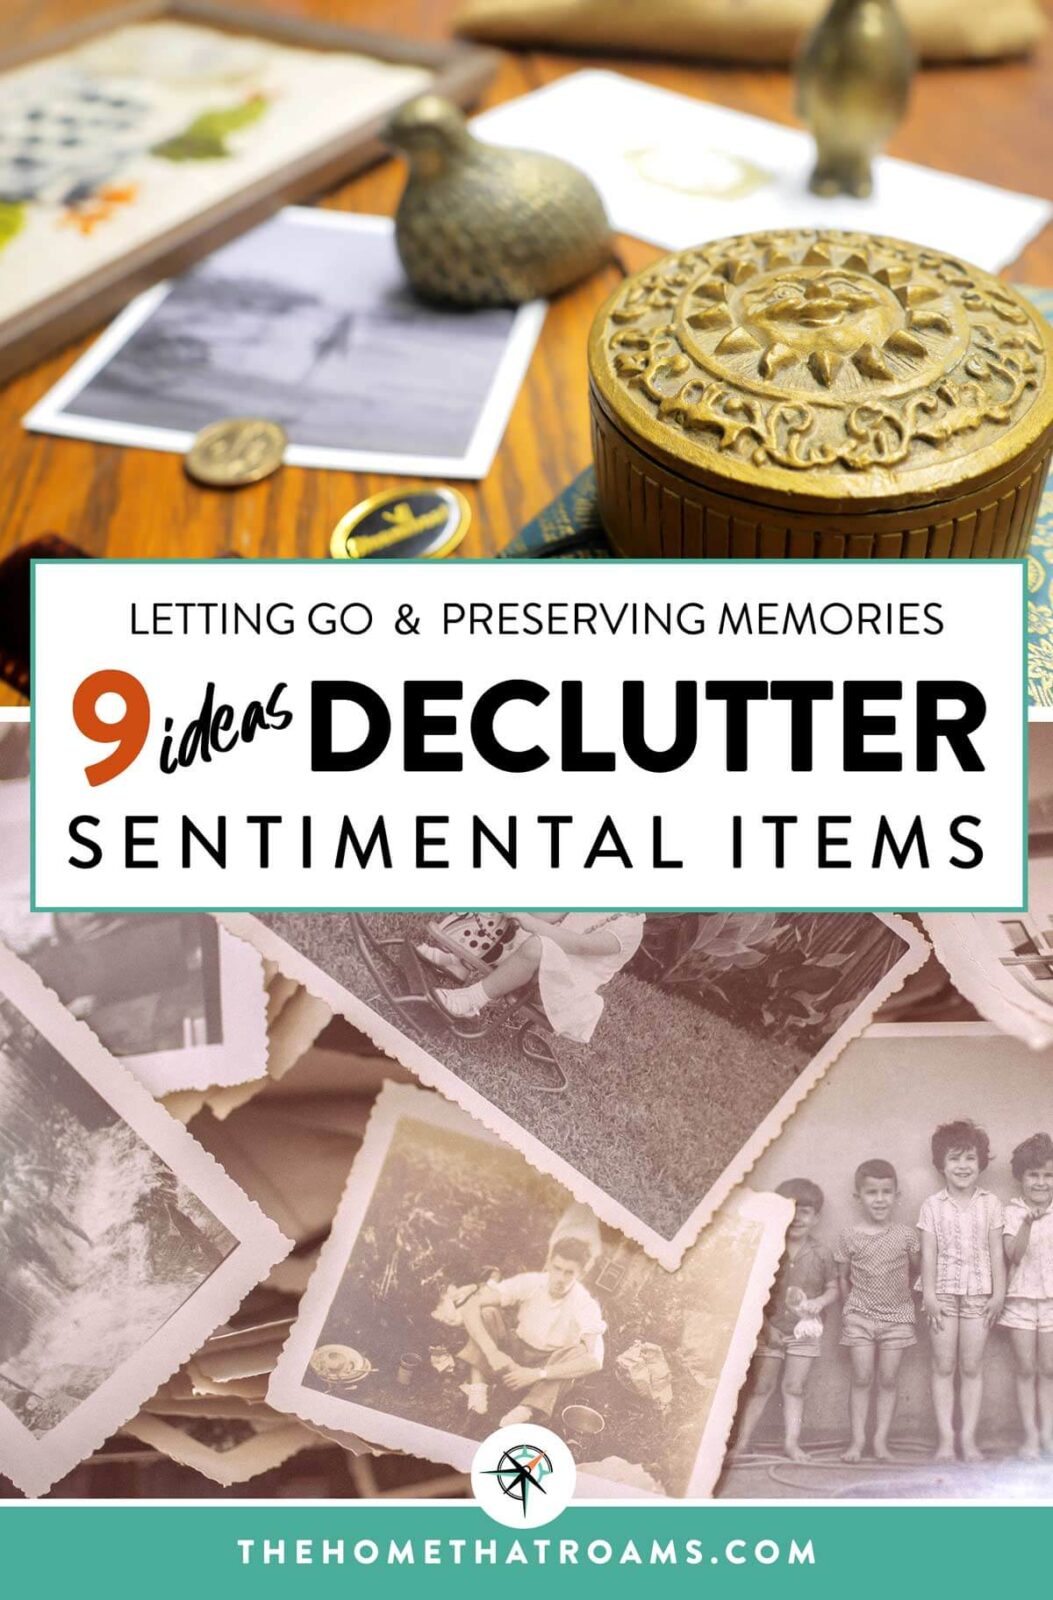 Pinterest image of sentimental items and old photographs on a table.